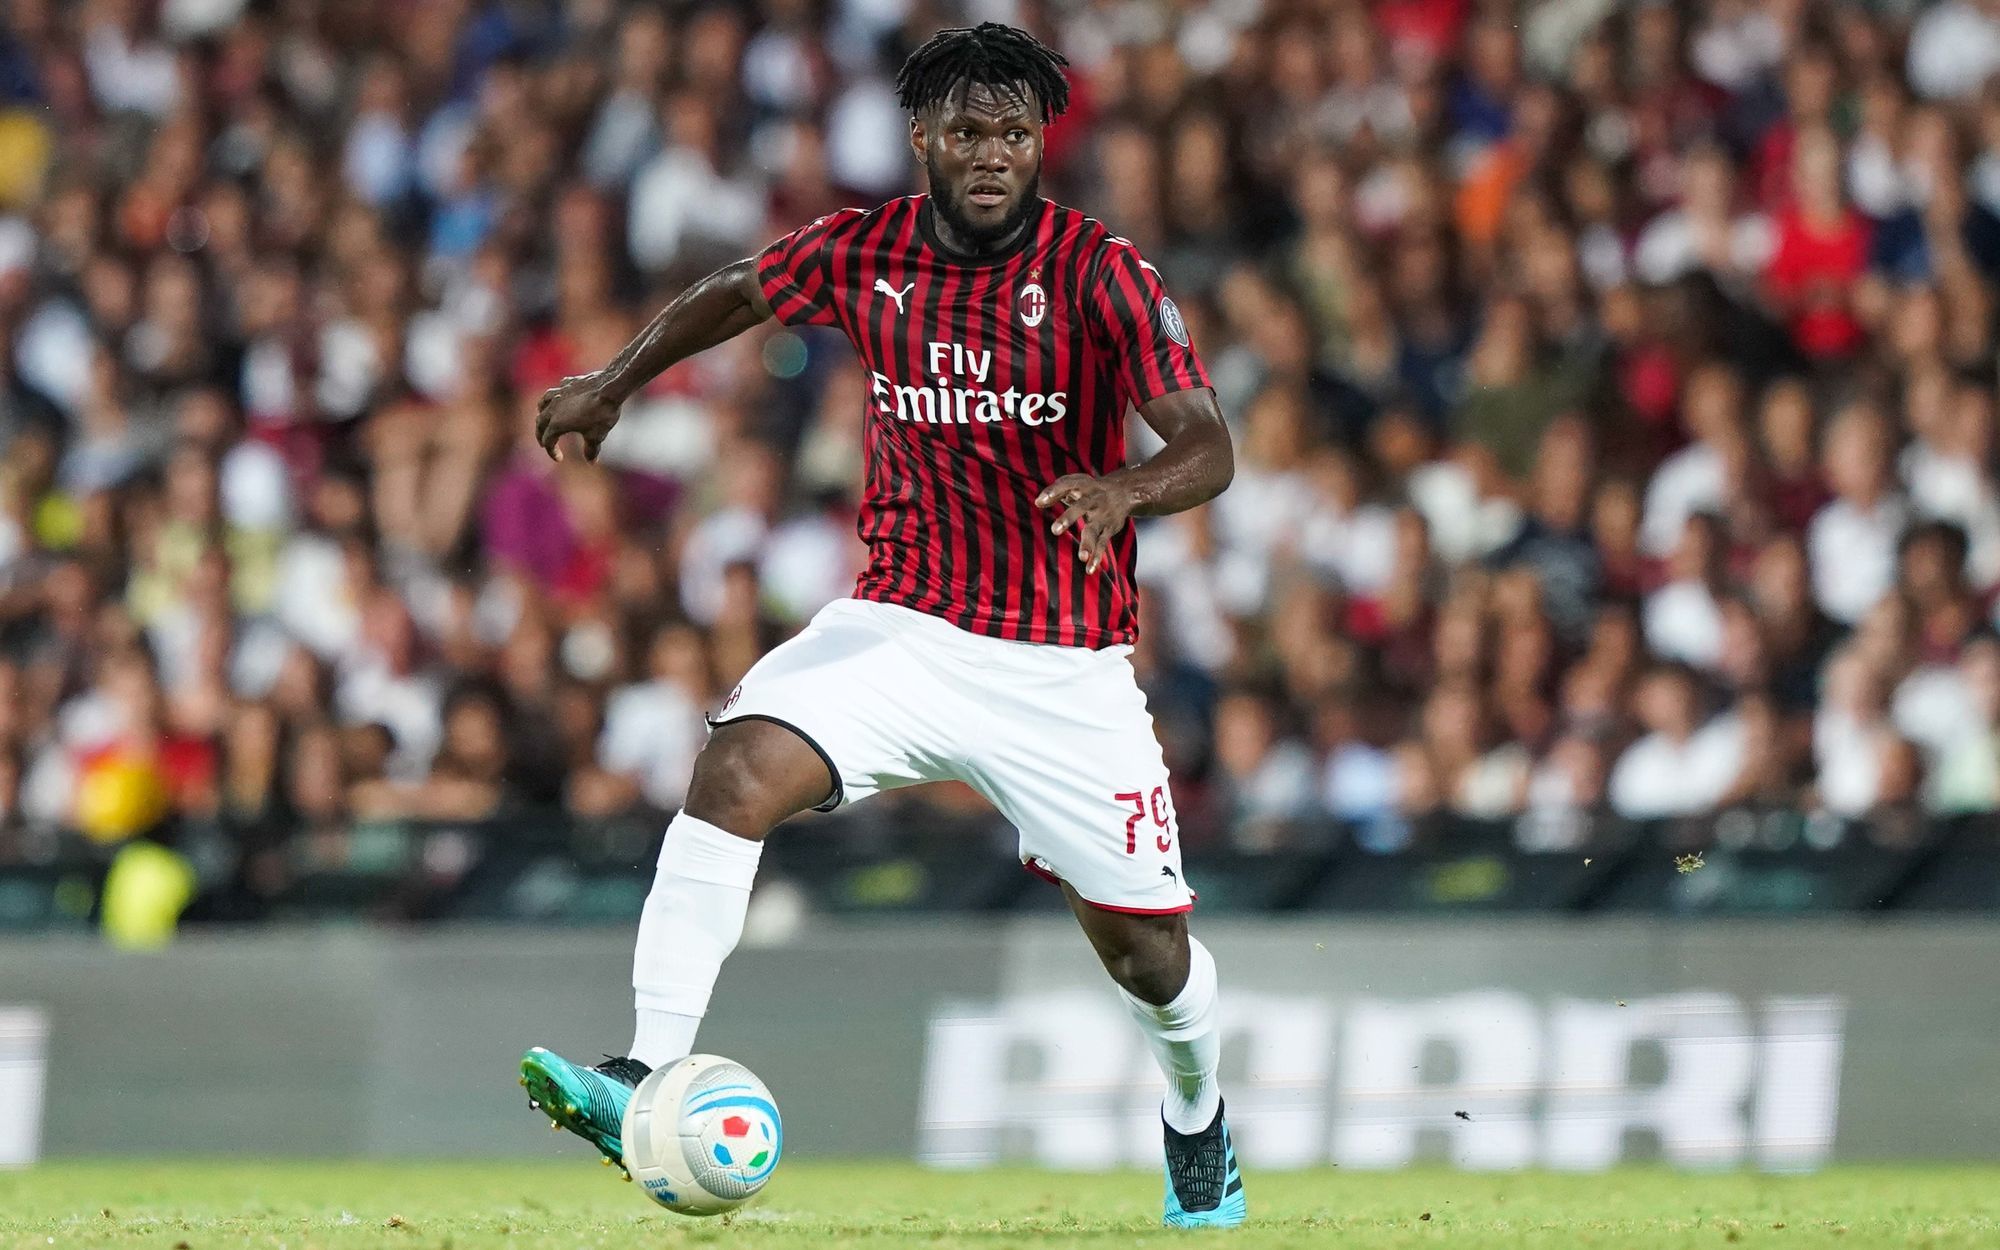 Franck Kessie during the friendly match between Cesena and AC Milan on August 17th, 2019.
Photo: LaPresse / Icon Sport